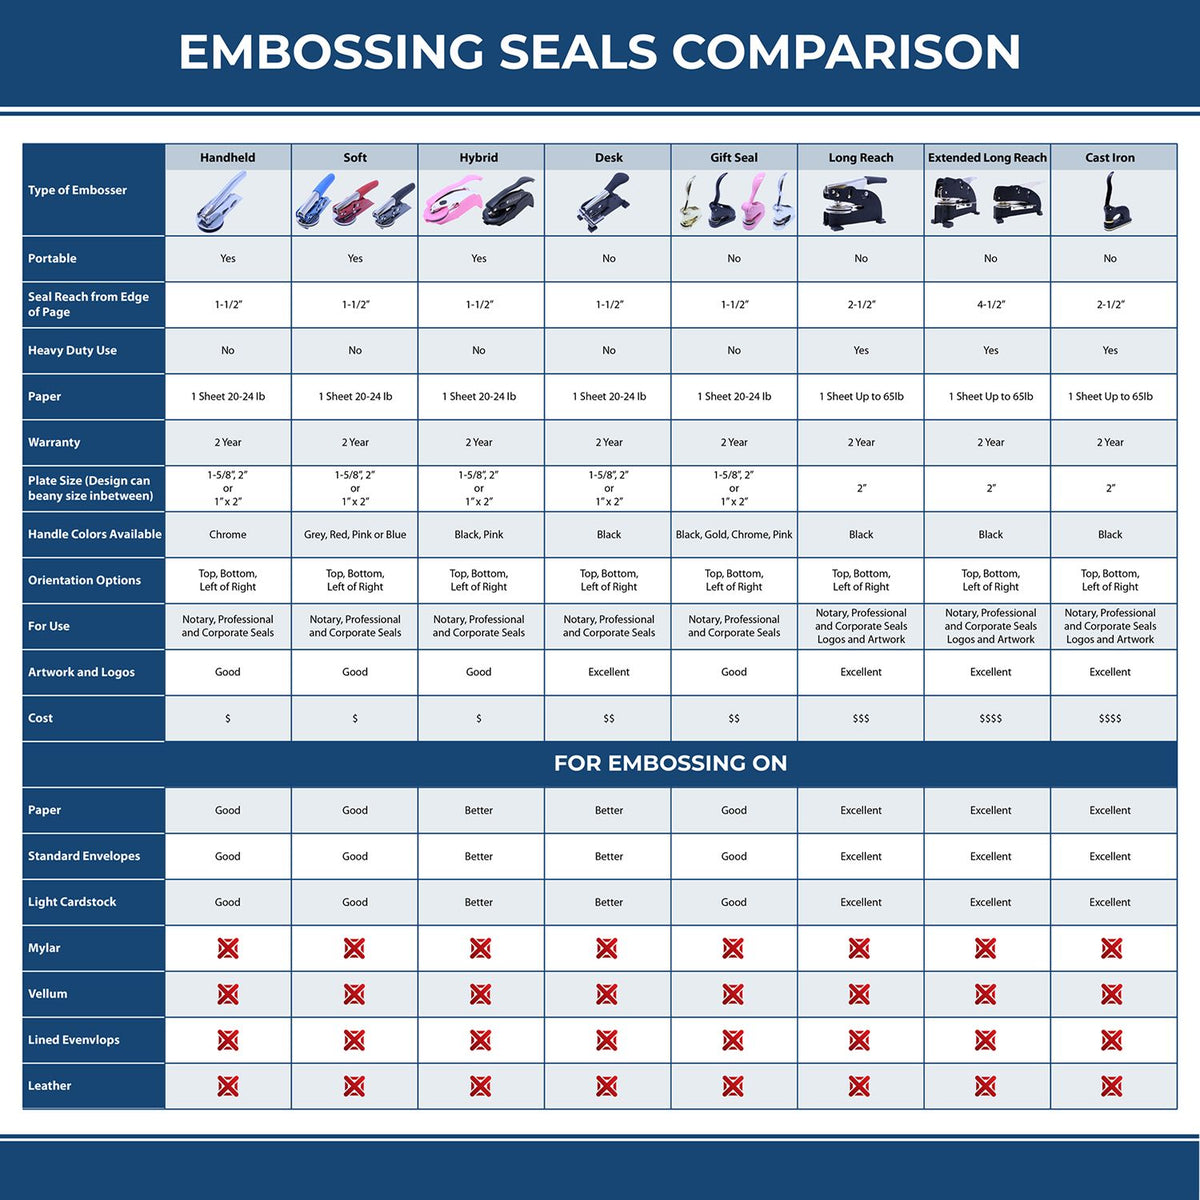 A comparison chart for the different types of mount models available for the Handheld Nevada Land Surveyor Seal.